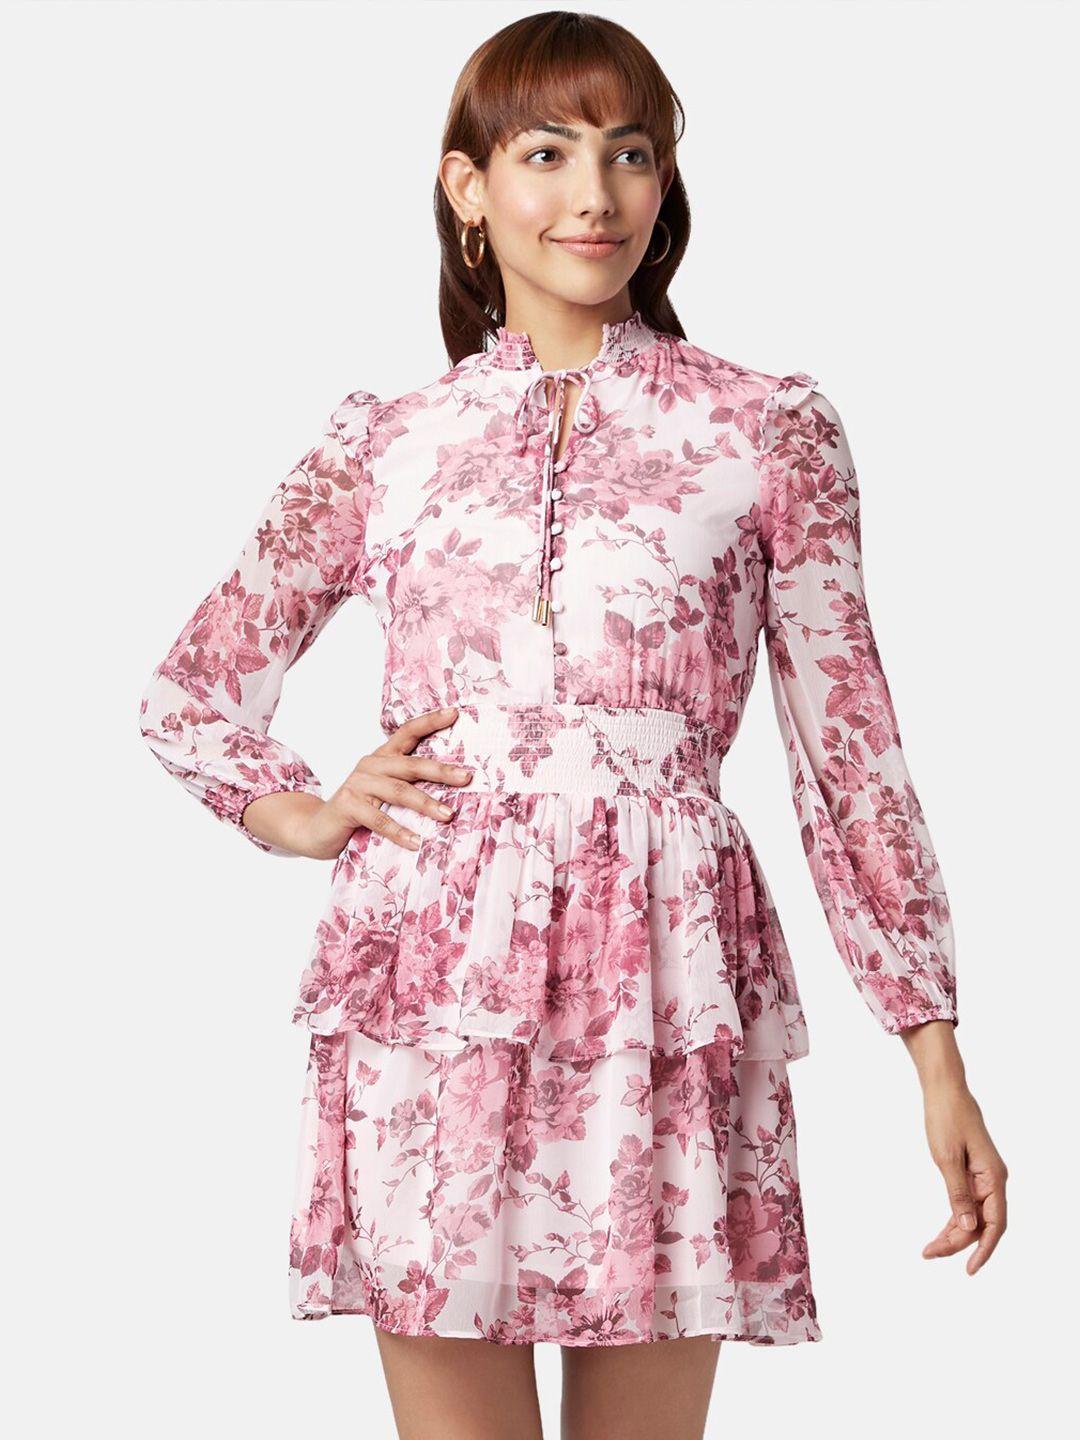 honey by pantaloons floral printed tie-up neck layered fit & flare dress